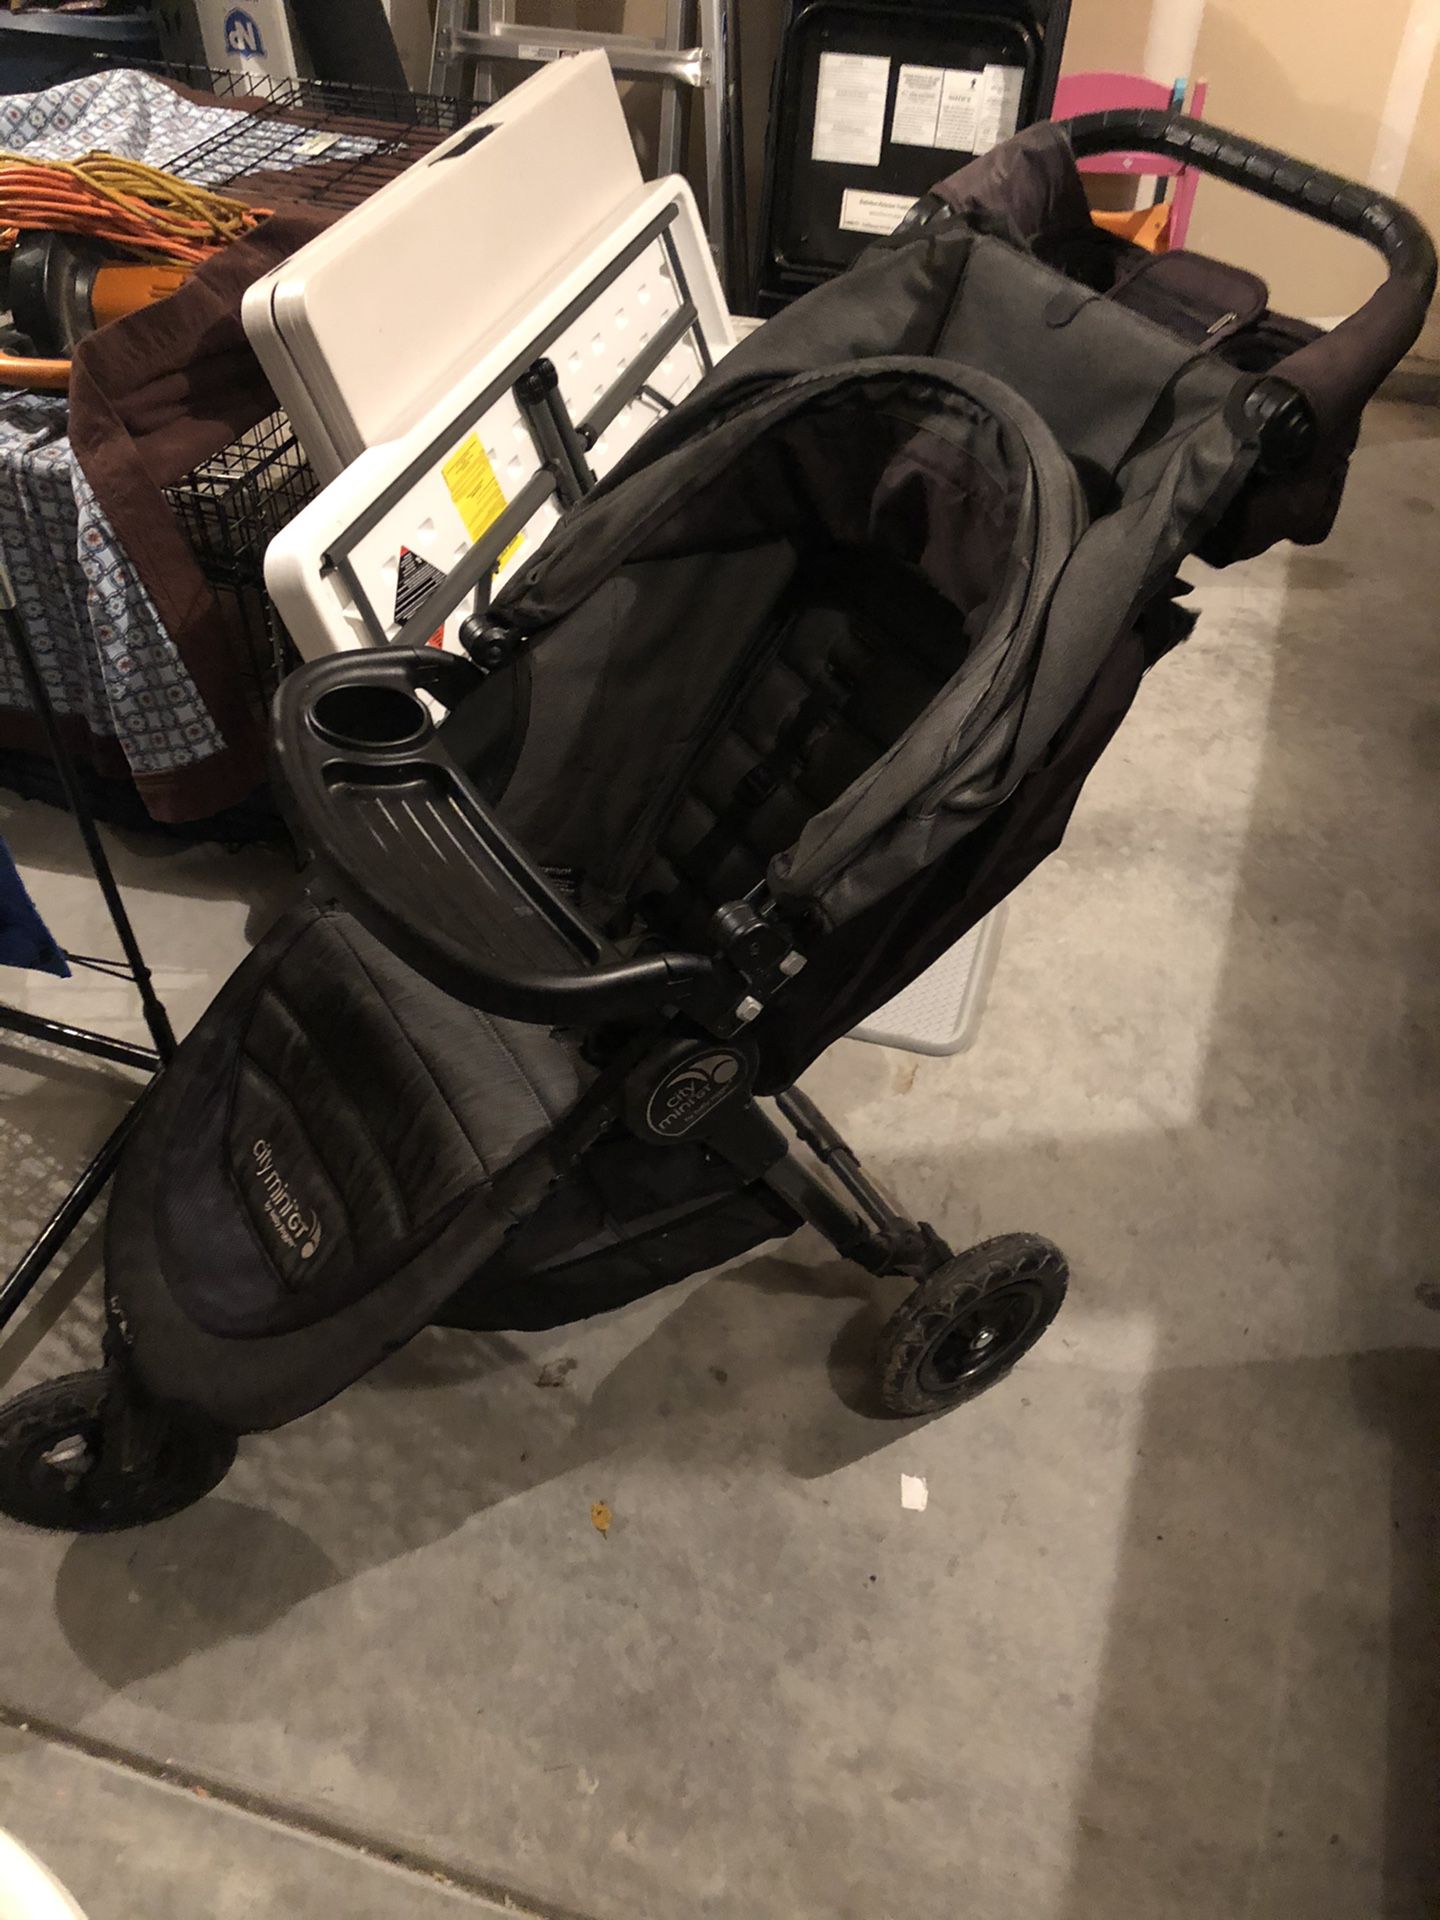 Stroller and high chair